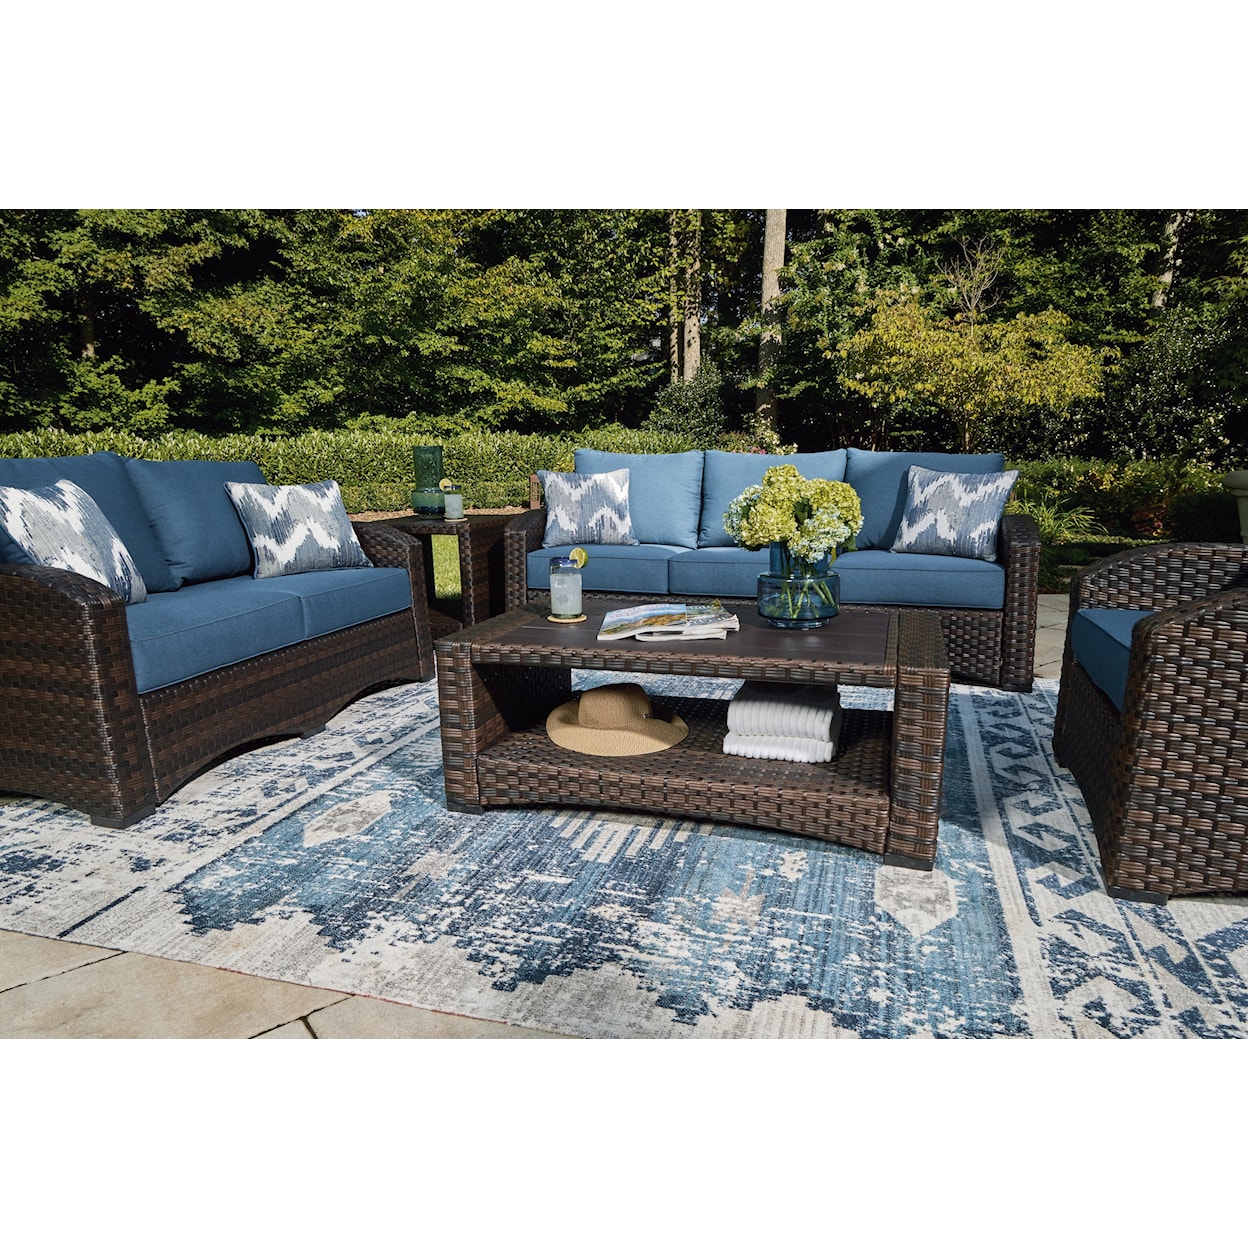 Signature Design by Ashley Windglow Outdoor Rectangular Coffee Table